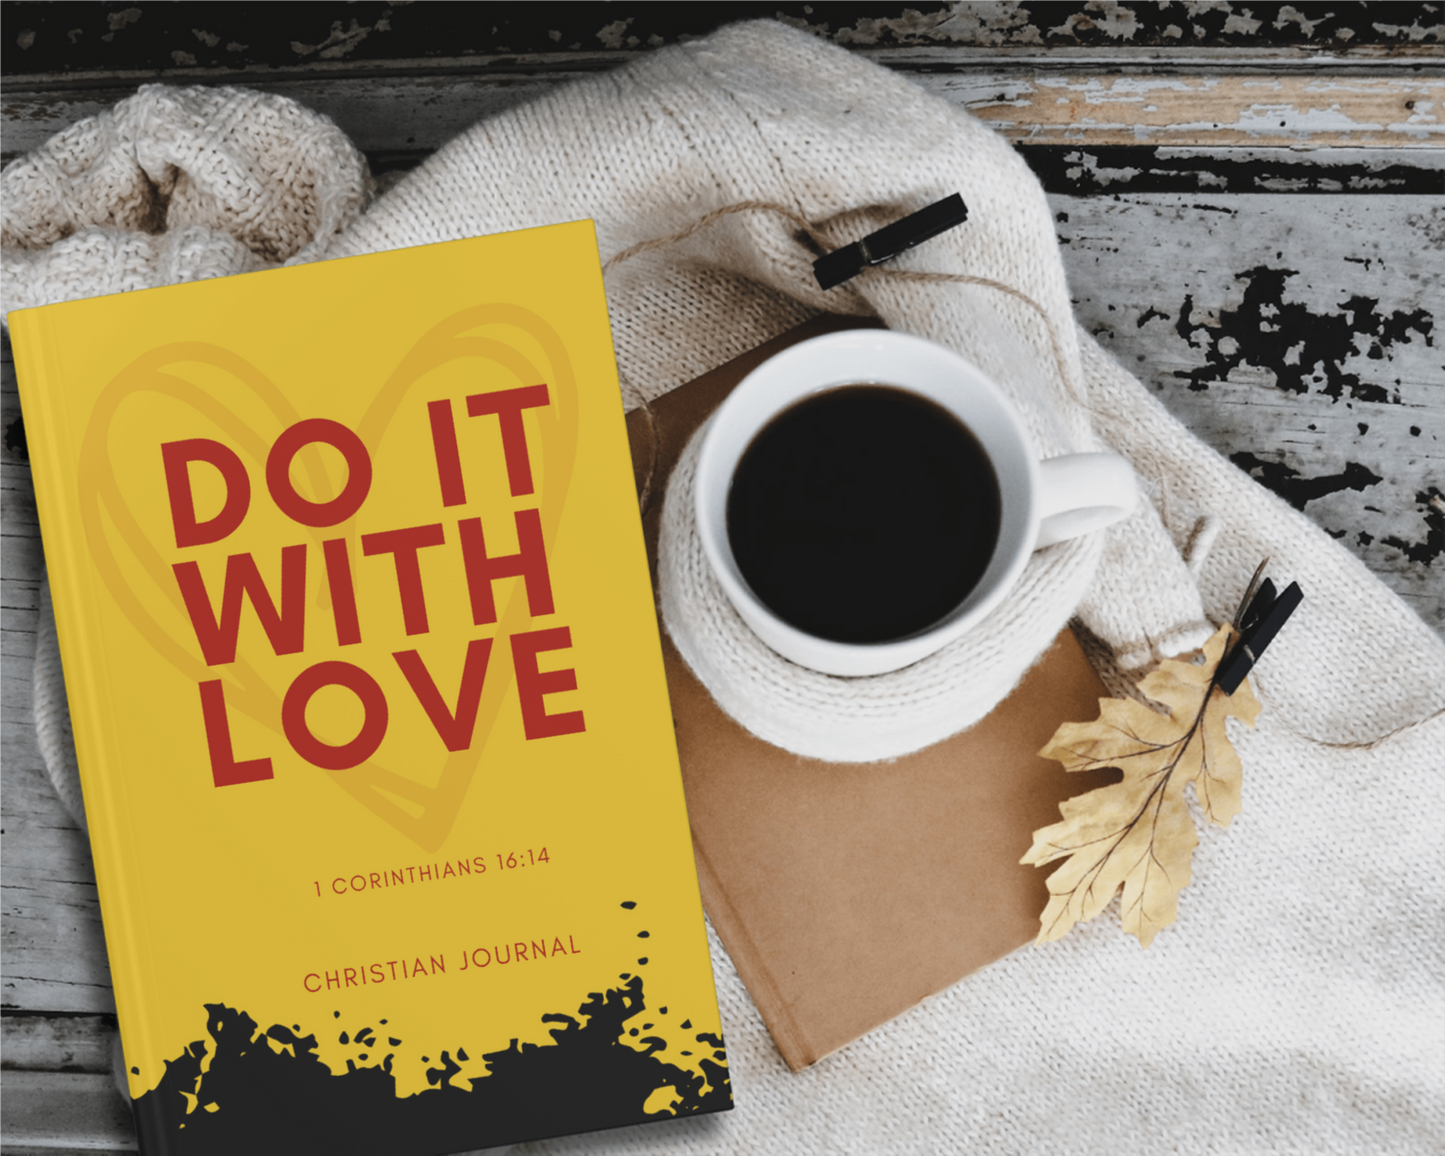 Do It With Love - Daily Christian Journal for Women